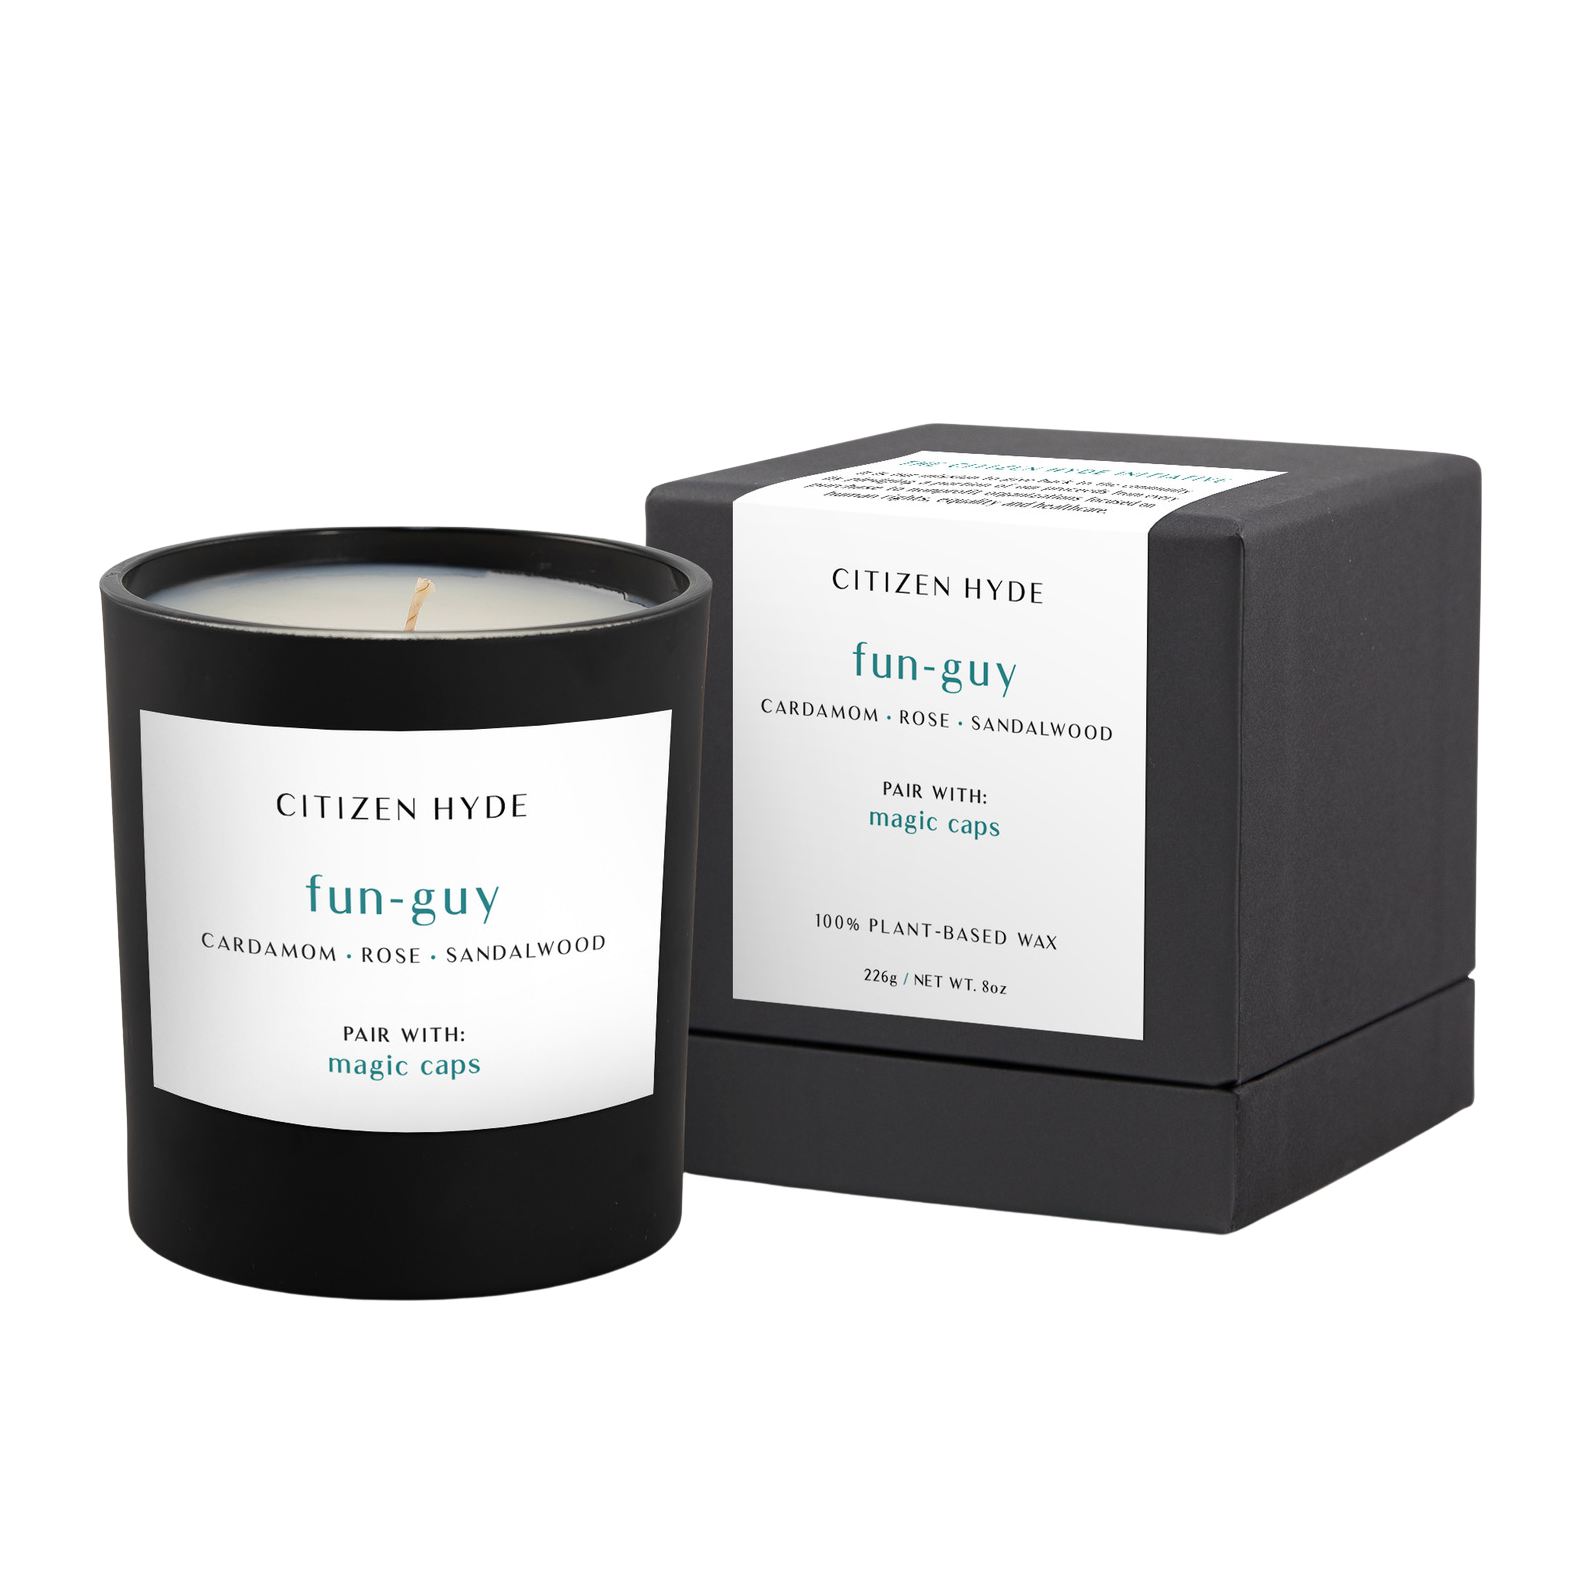 fun-guy Citizen Hyde candle, pair with magic caps